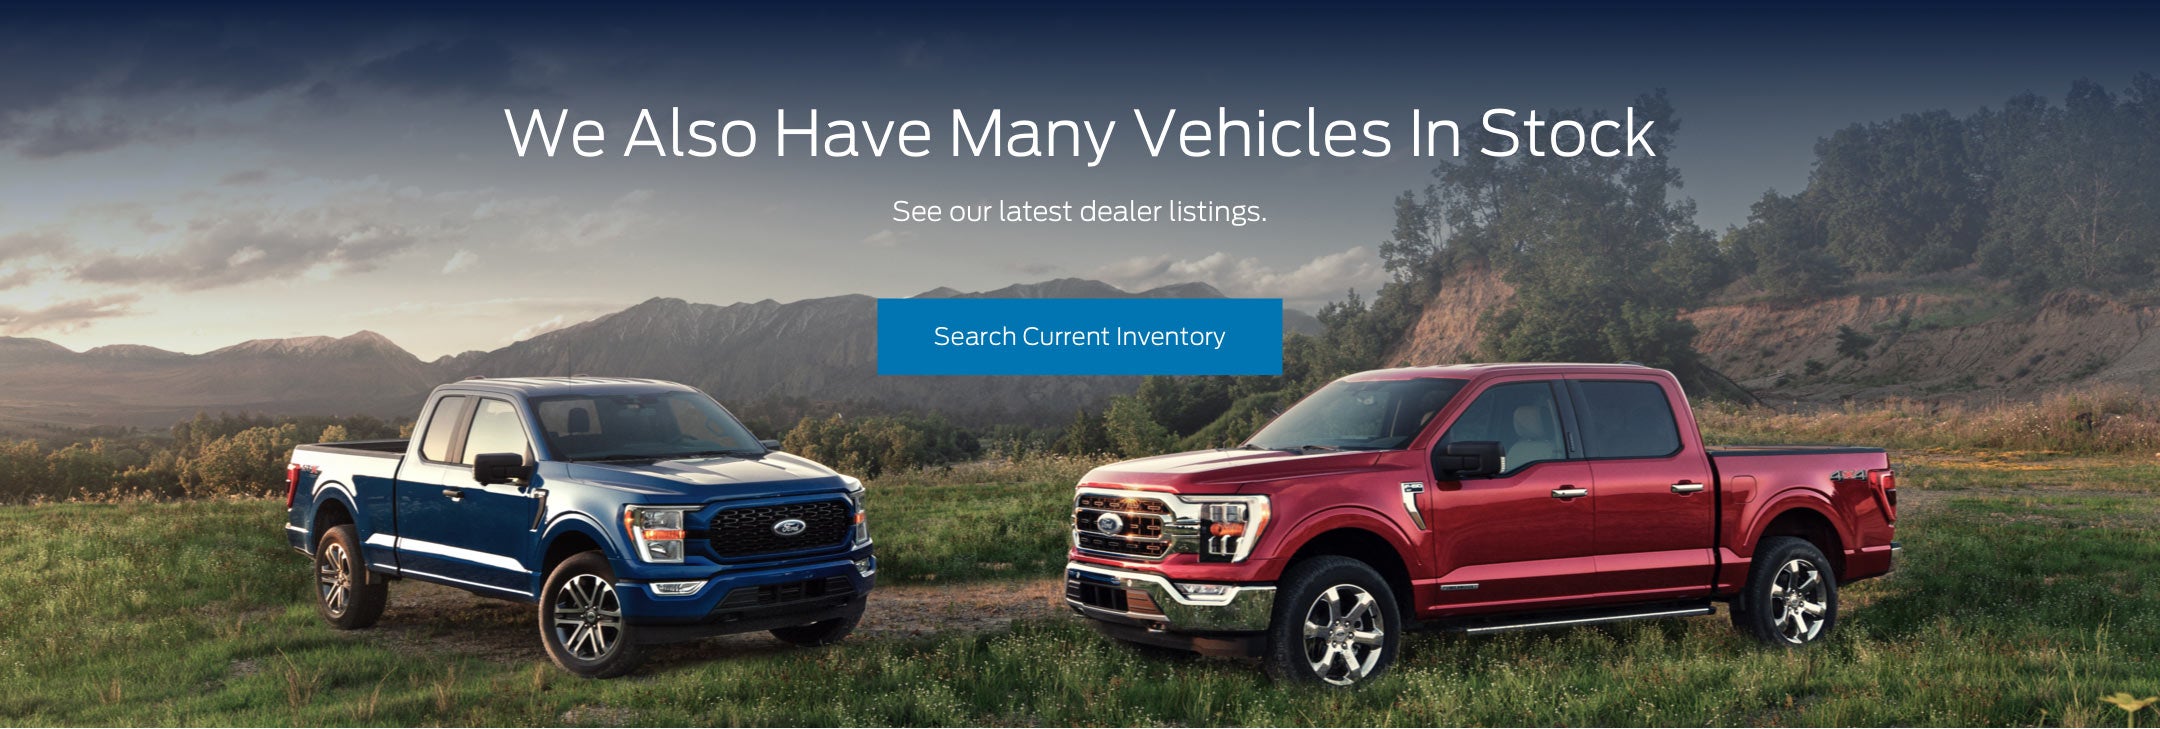 Ford vehicles in stock | Bommarito Ford Superstore in Hazelwood MO